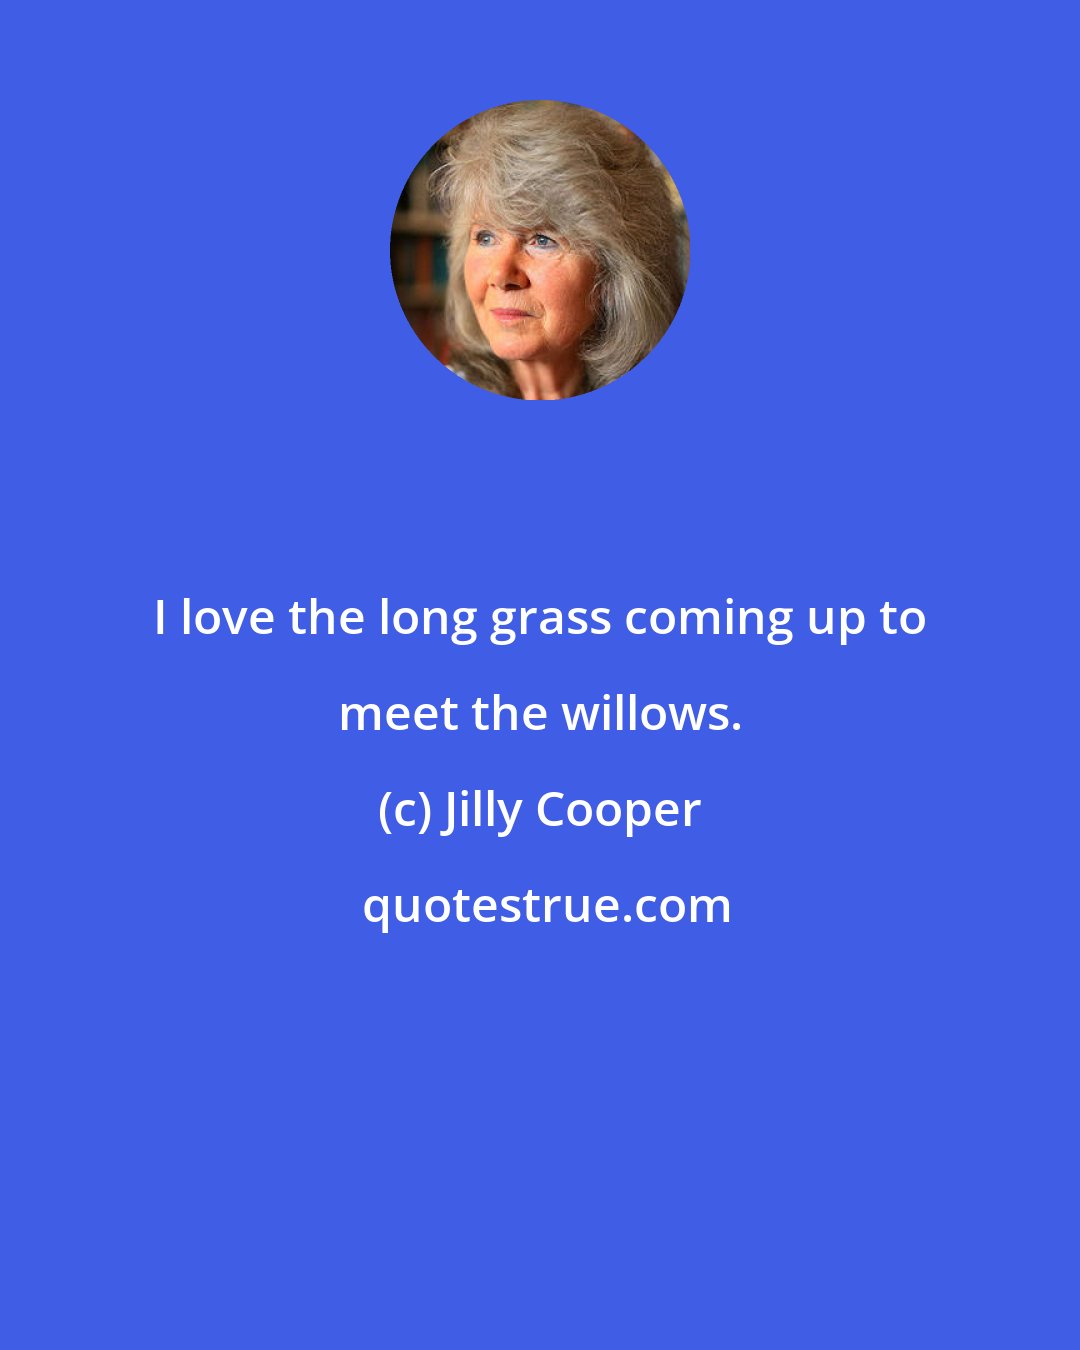 Jilly Cooper: I love the long grass coming up to meet the willows.